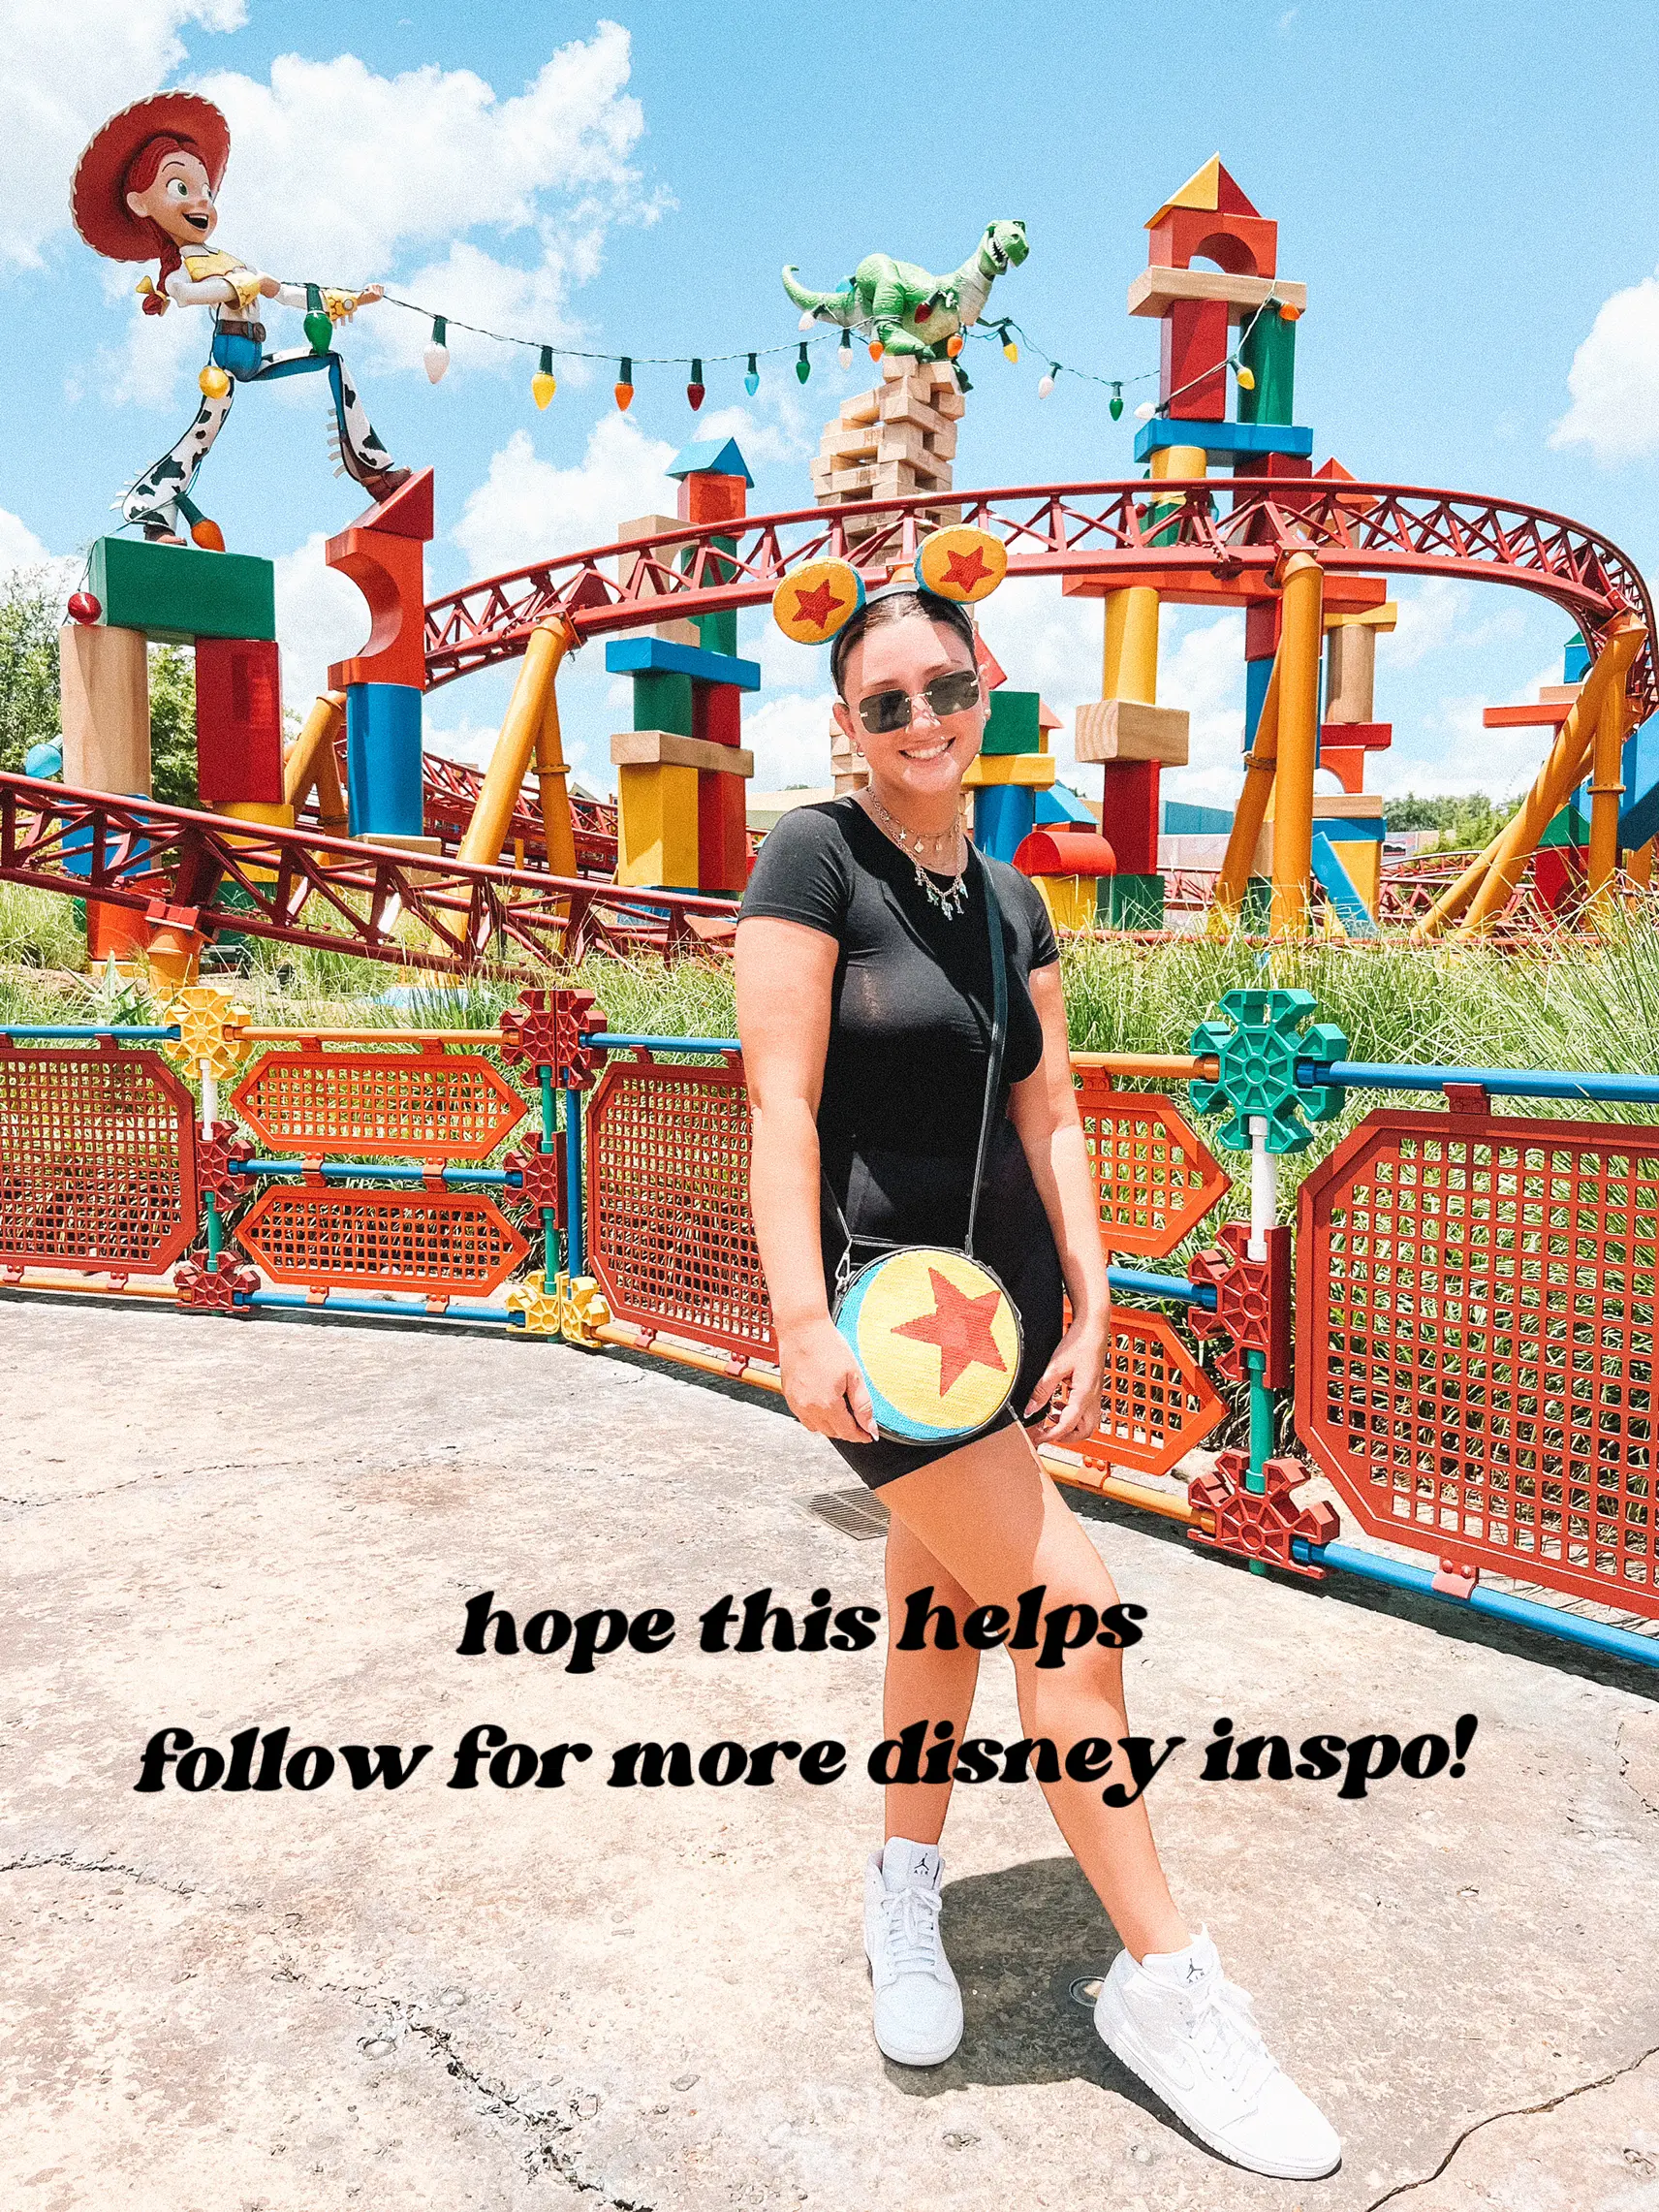  A woman wearing a black shirt and sunglasses is standing in front of a ferris wheel at a theme park. She is holding a frisbee and has a backpack on.